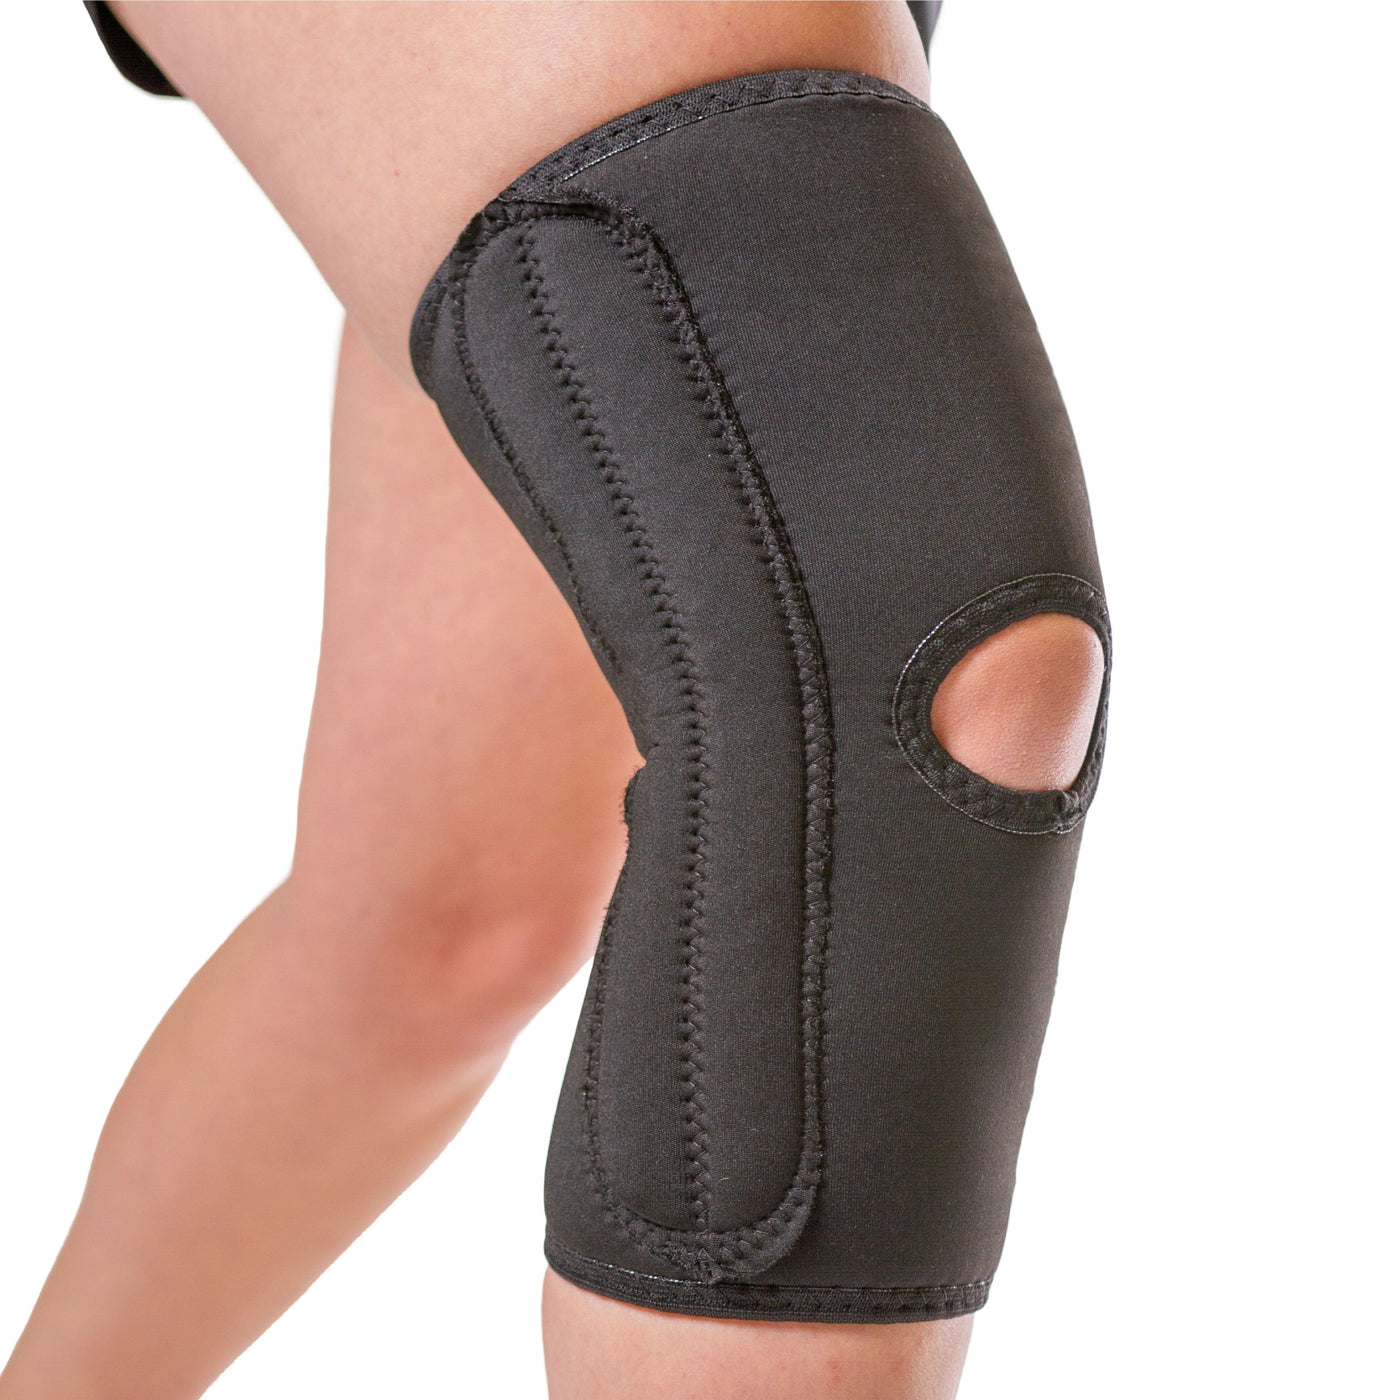 What is the difference between an Open Patella and Closed Patella